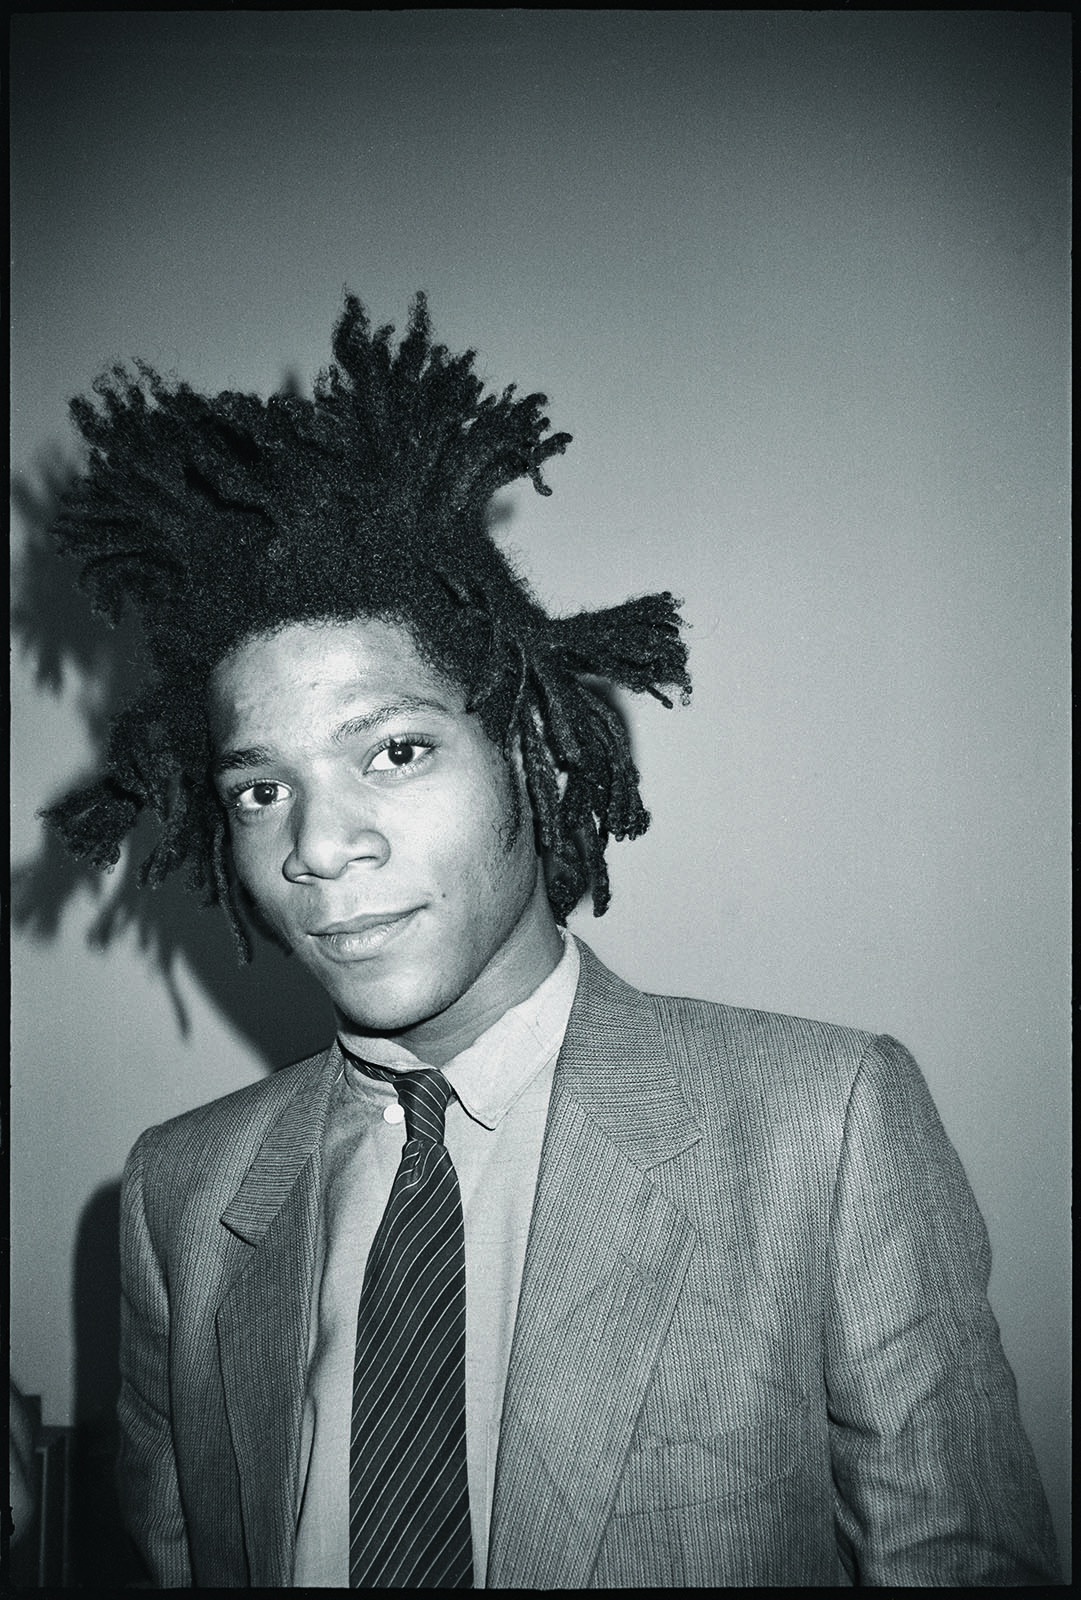 Andy Warhol (U.S.A., 1928–1987), Negative [Jean-Michel Basquiat portrait photo shoot], 1982, Black-and-white negatives. Cantor Arts Center collection, Gift of The Andy Warhol Foundation for the Visual Arts, 2014.41.873_27. © The Andy Warhol Foundation for the Visual Arts, Inc.